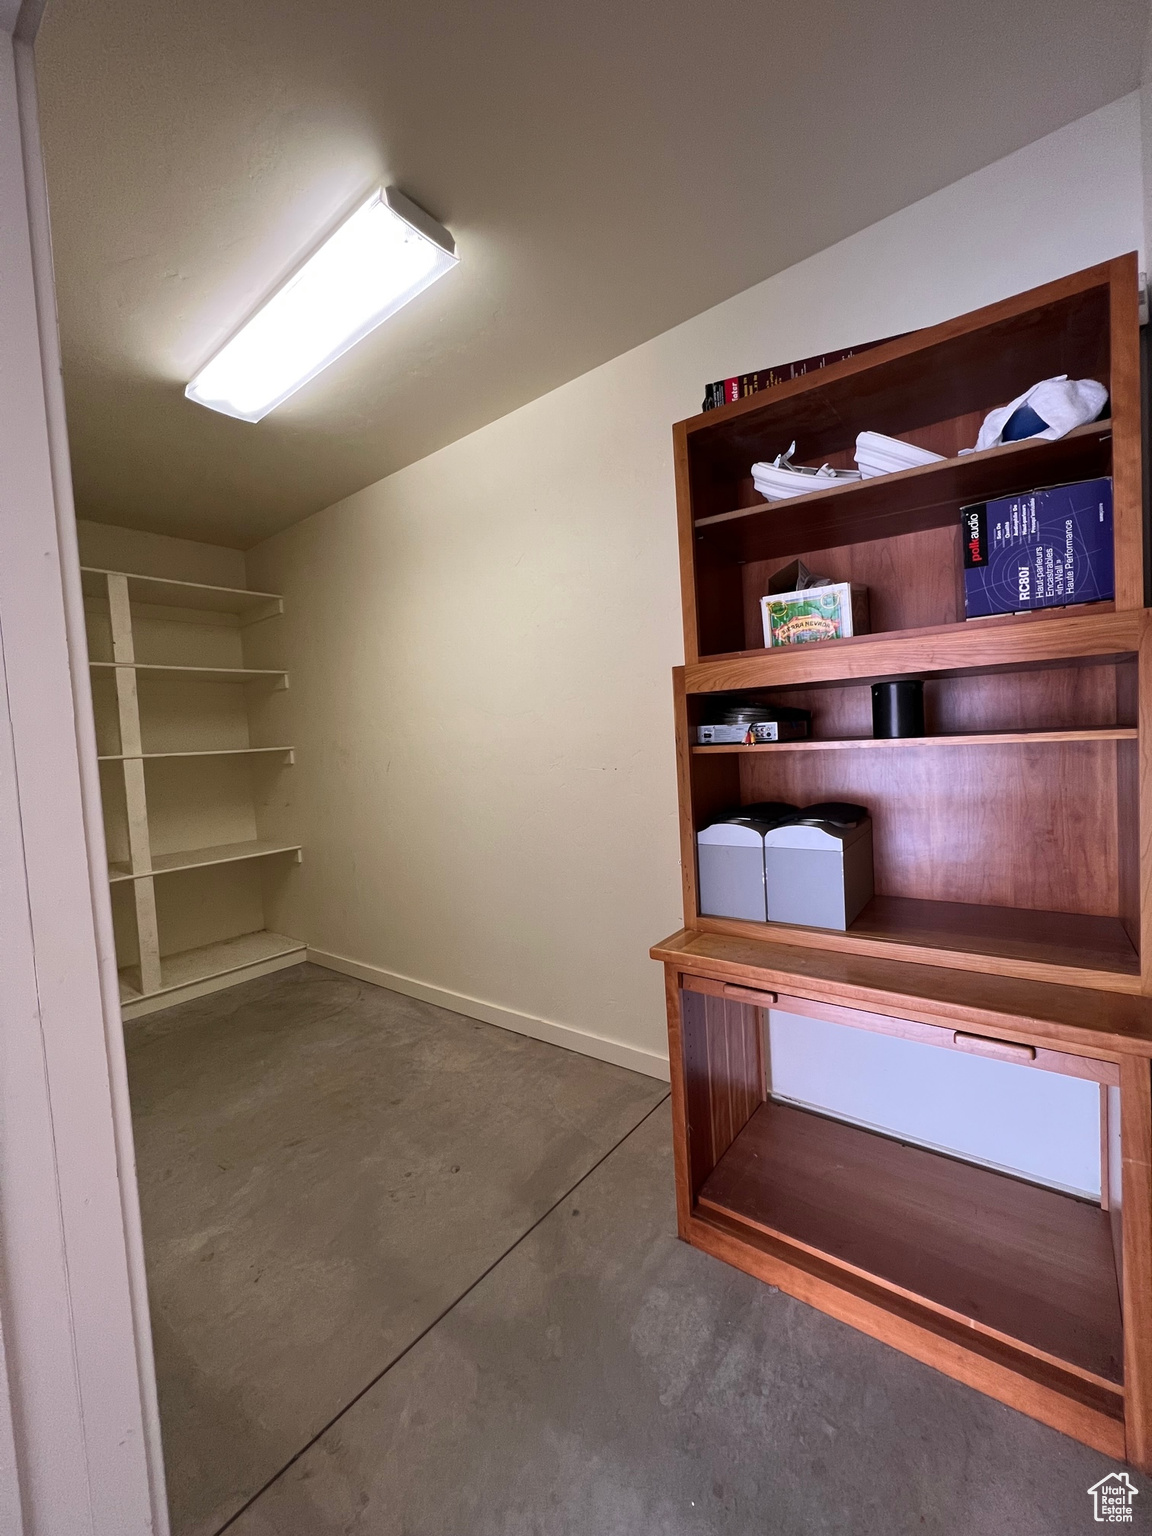 Giant owner closet in garage.  Clean shelves and extra storage.